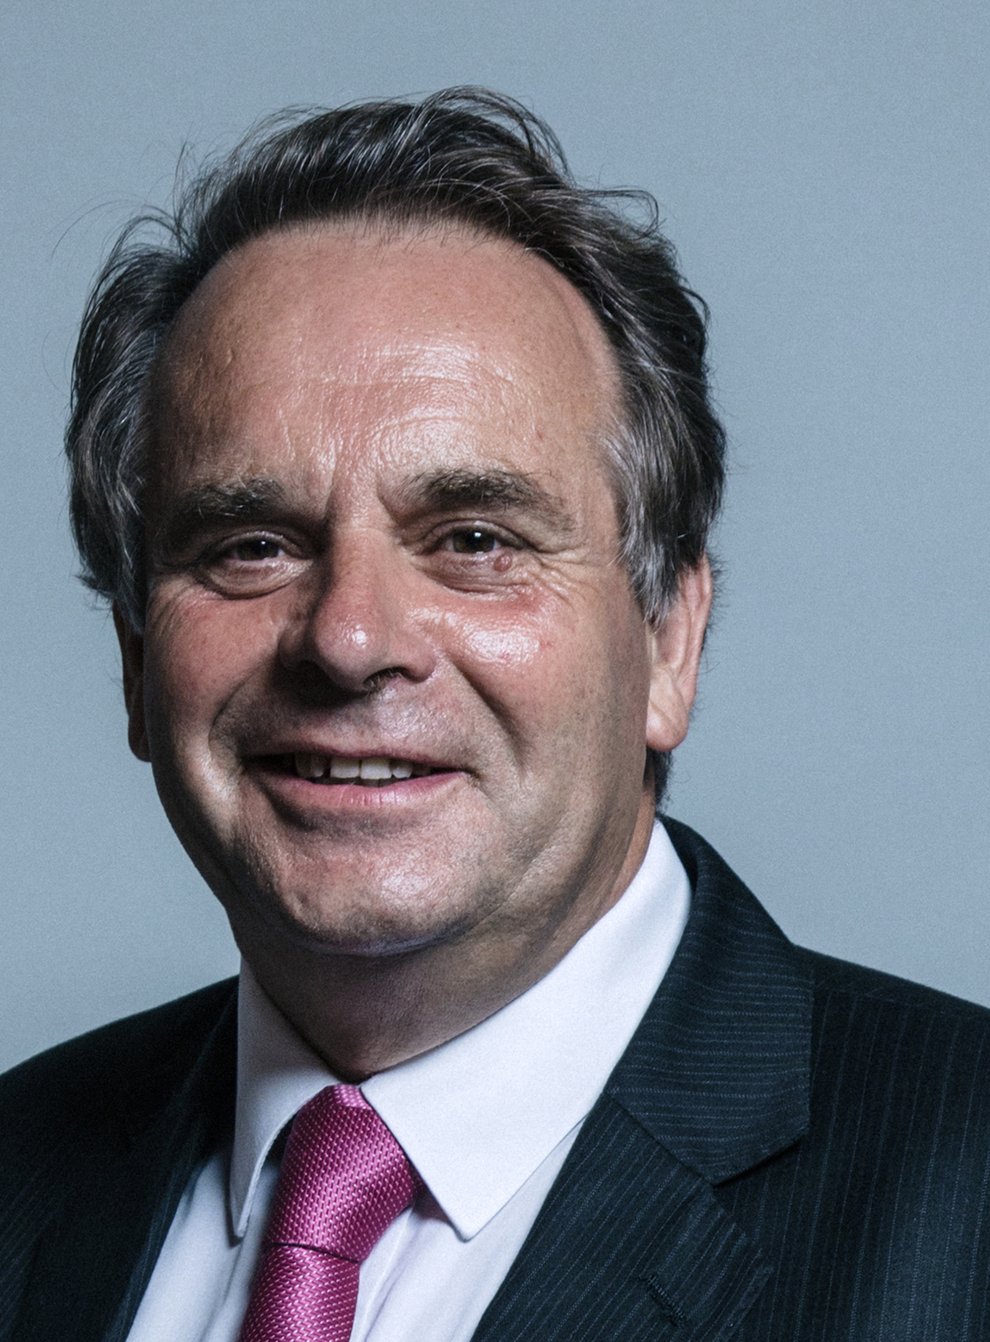 Former Tory MP Neil Parish said his party must ‘face reality’ after losing stronghold Tiverton and Honiton (Chris McAndrew/UK Parliament/PA)